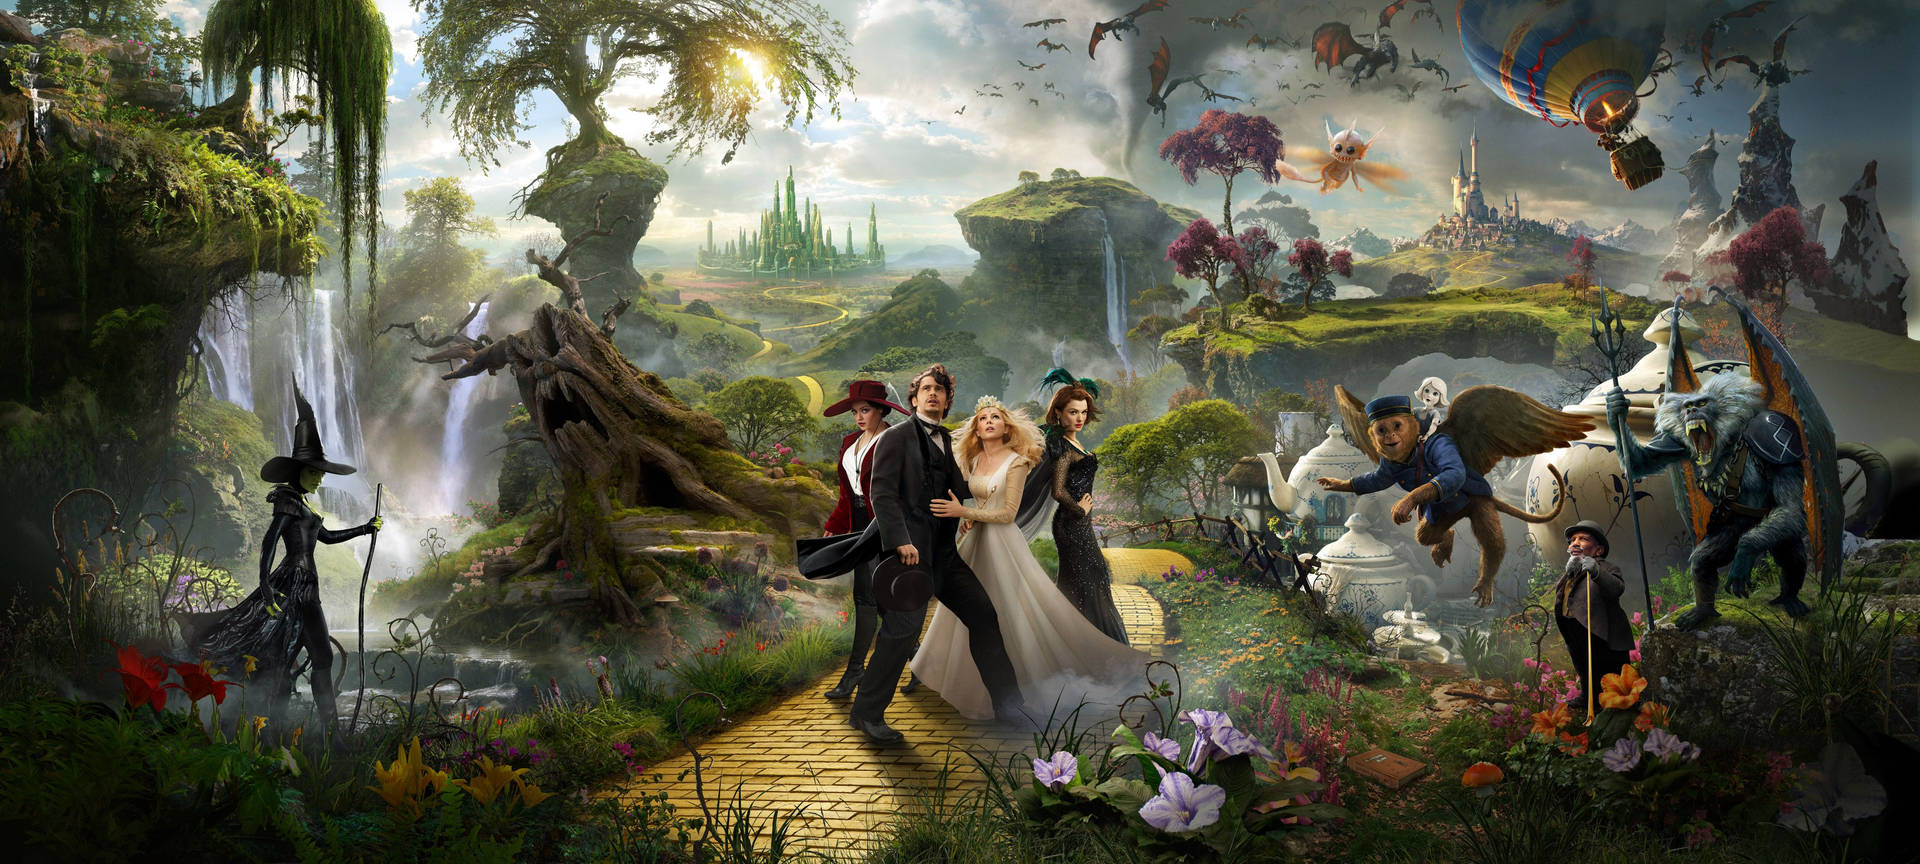 Oz The Great And Powerful Cast Background